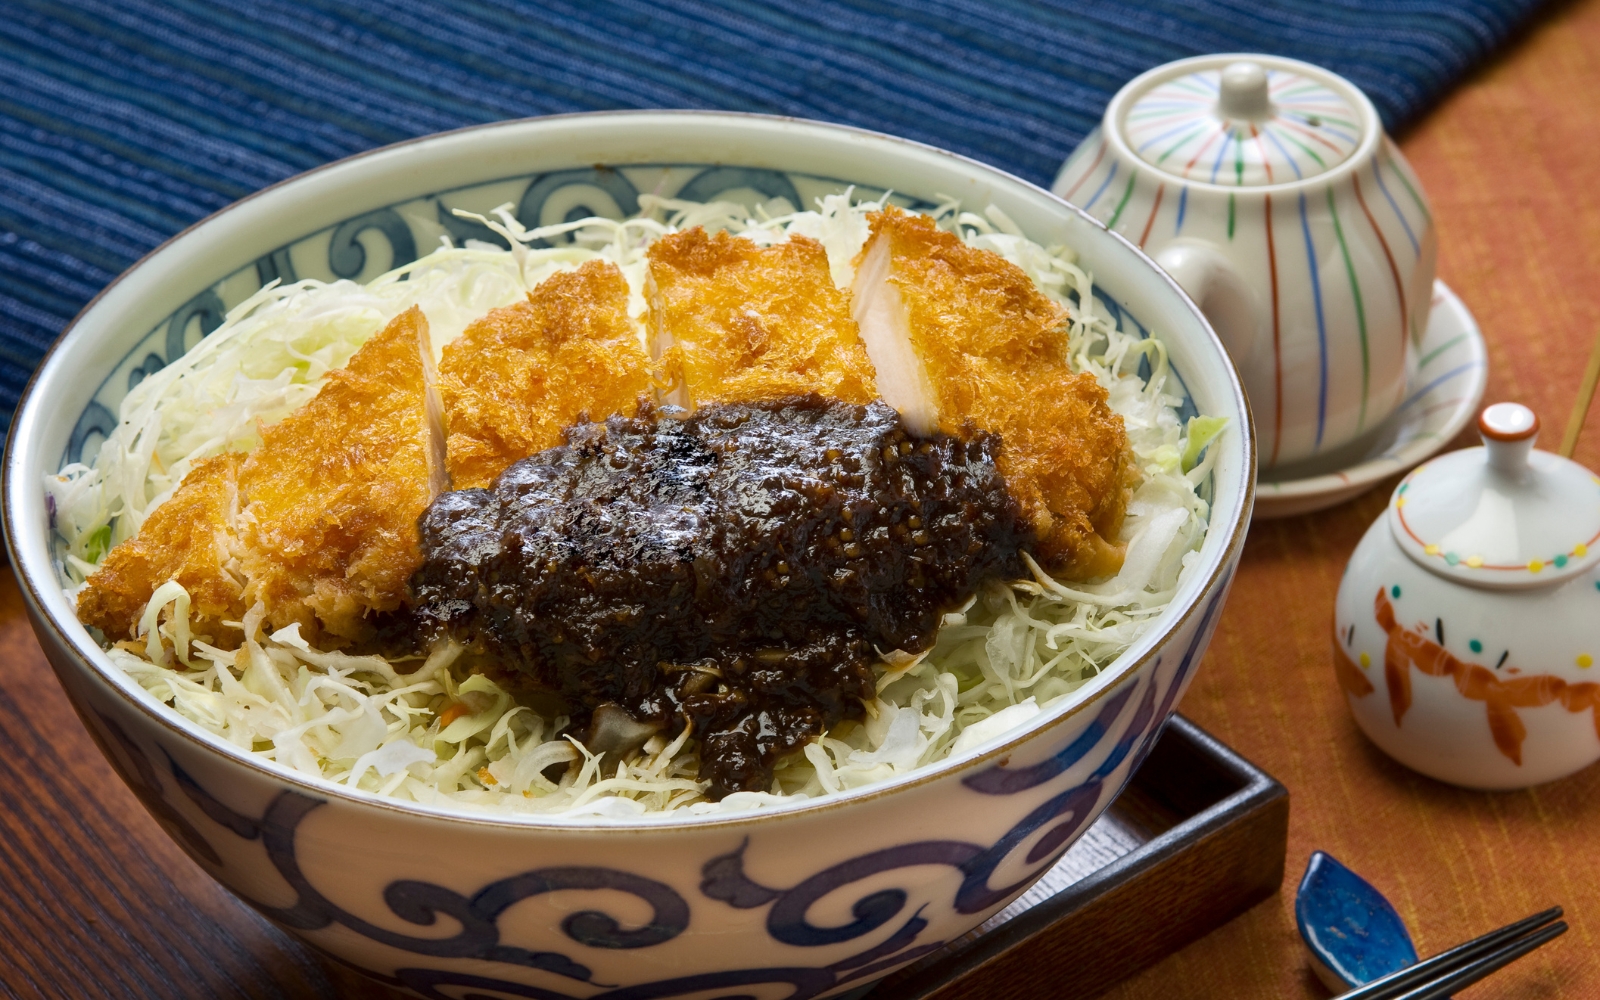 A plate of miso katsu, breaded pork with a sweet and savoury miso sauce